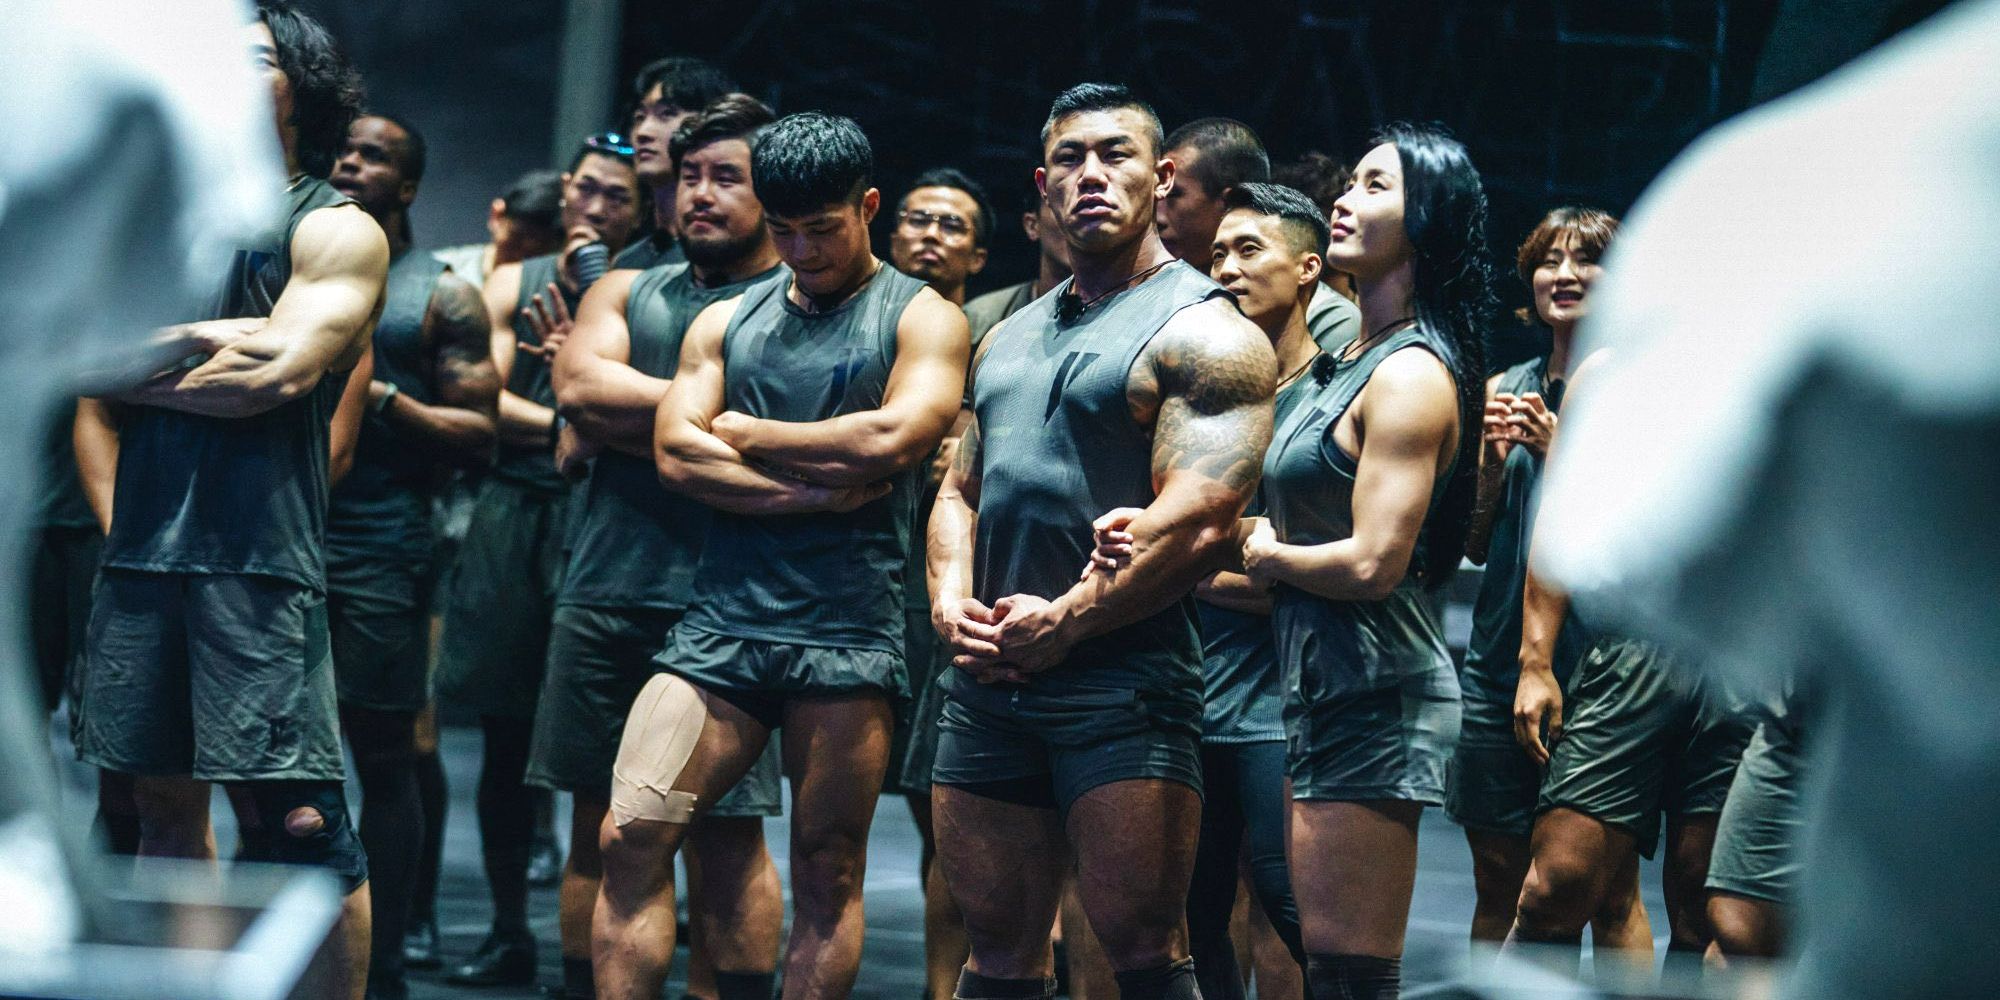 A line of Physical 100 contestants stand shoulder to shoulder, looking off in different directions. They are all wearing matching all-black workout clothes.